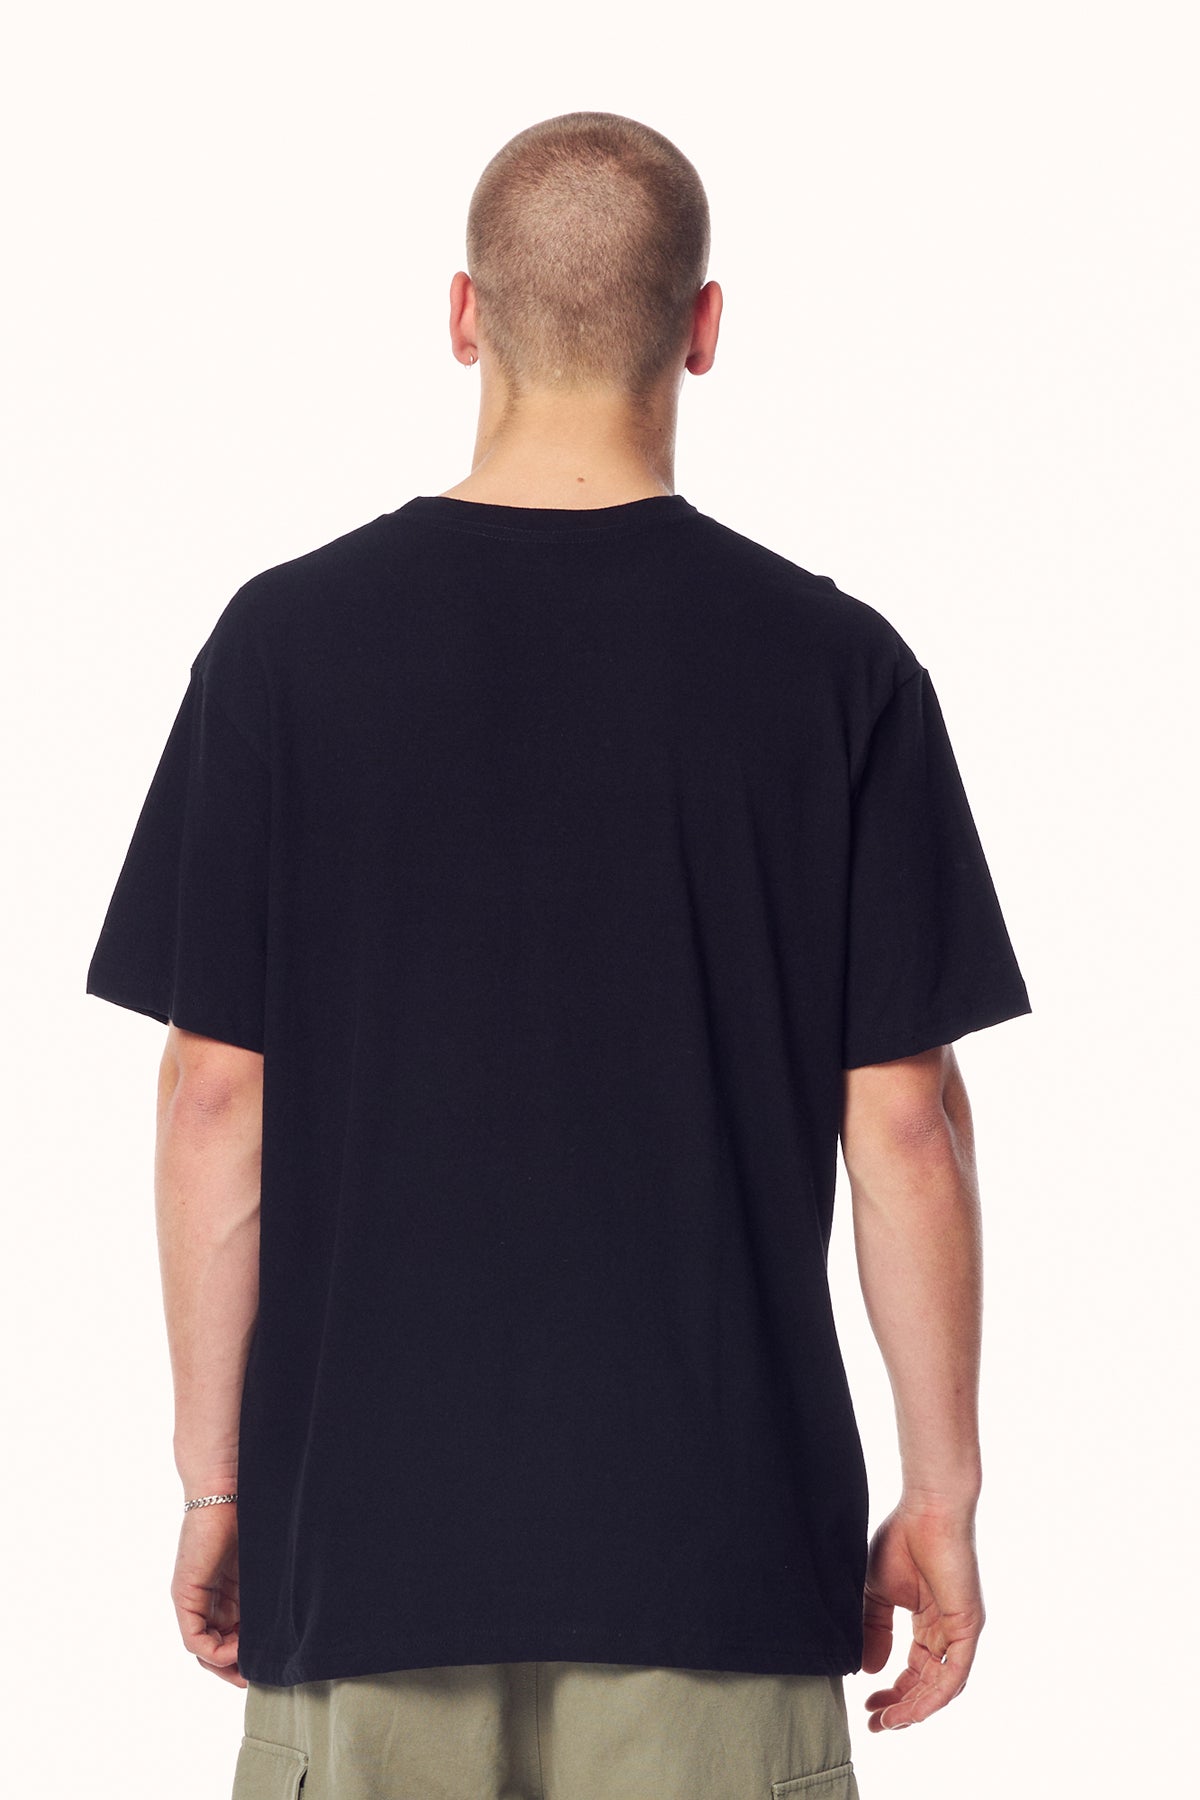 THERMAL SHOCK 50/50 SS TEE - Pitch Black